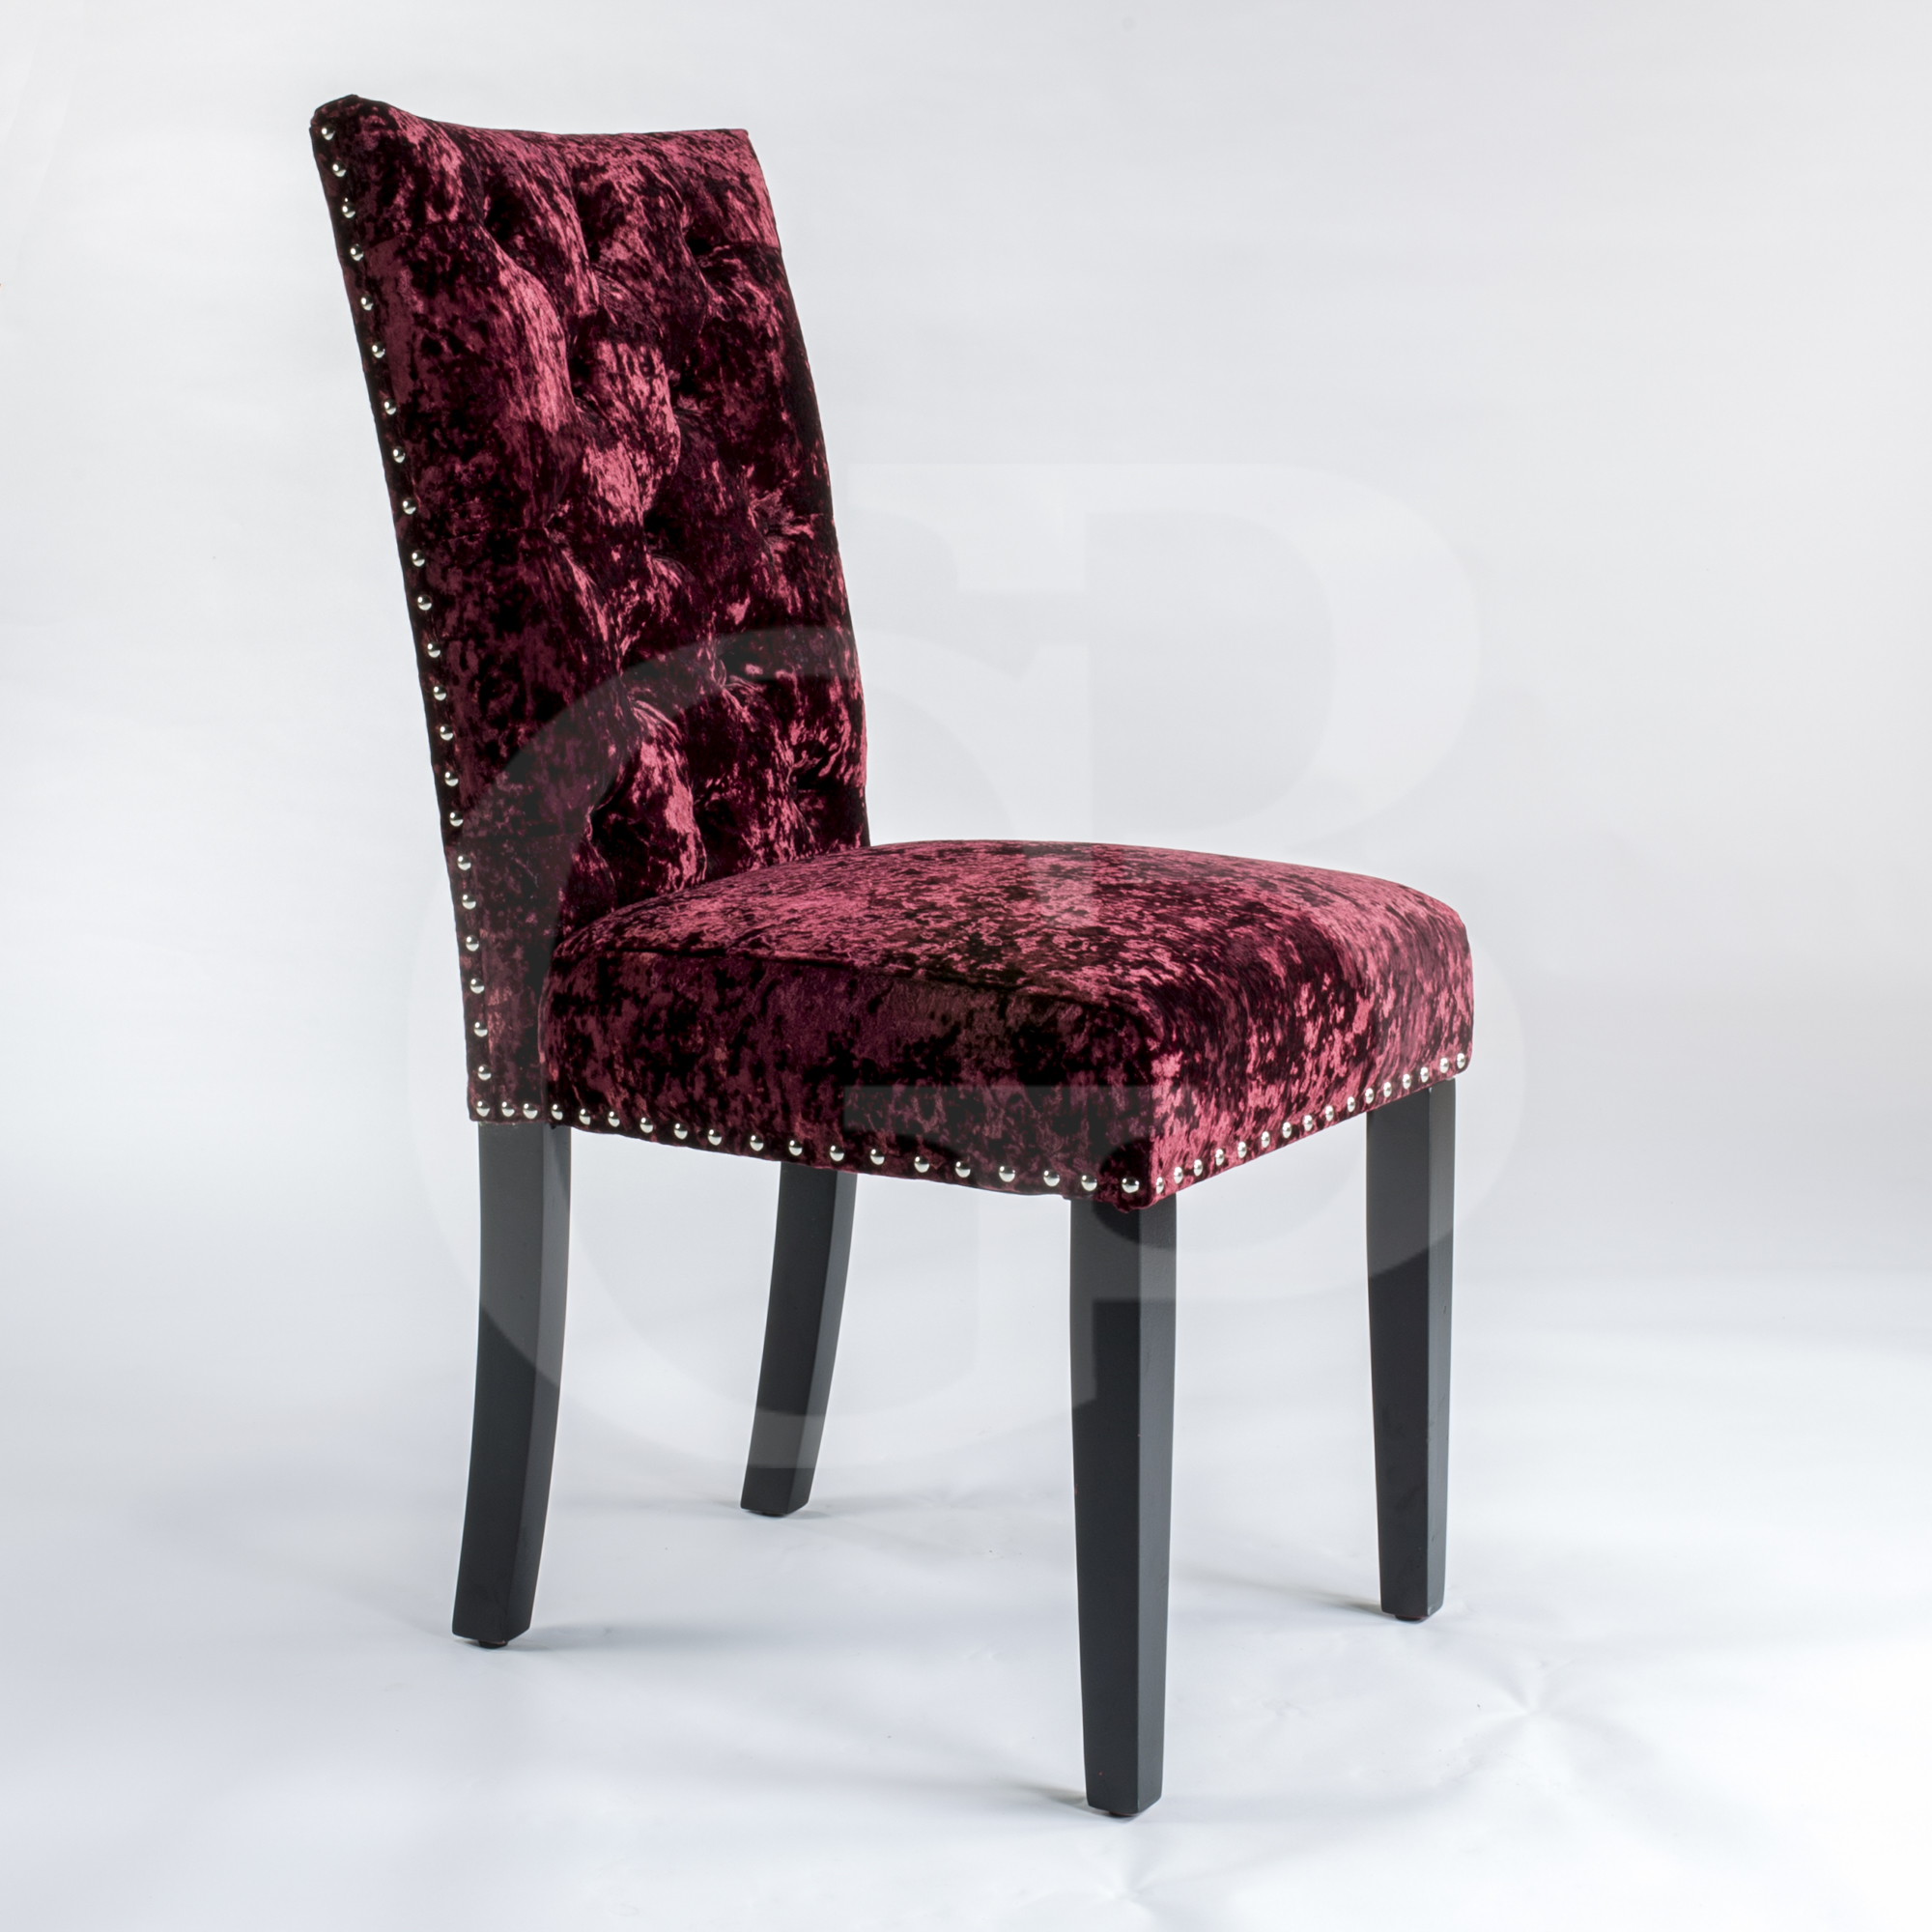 Pair of New Upholstered Premium Red Crushed Velvet Dining Chairs EGB76